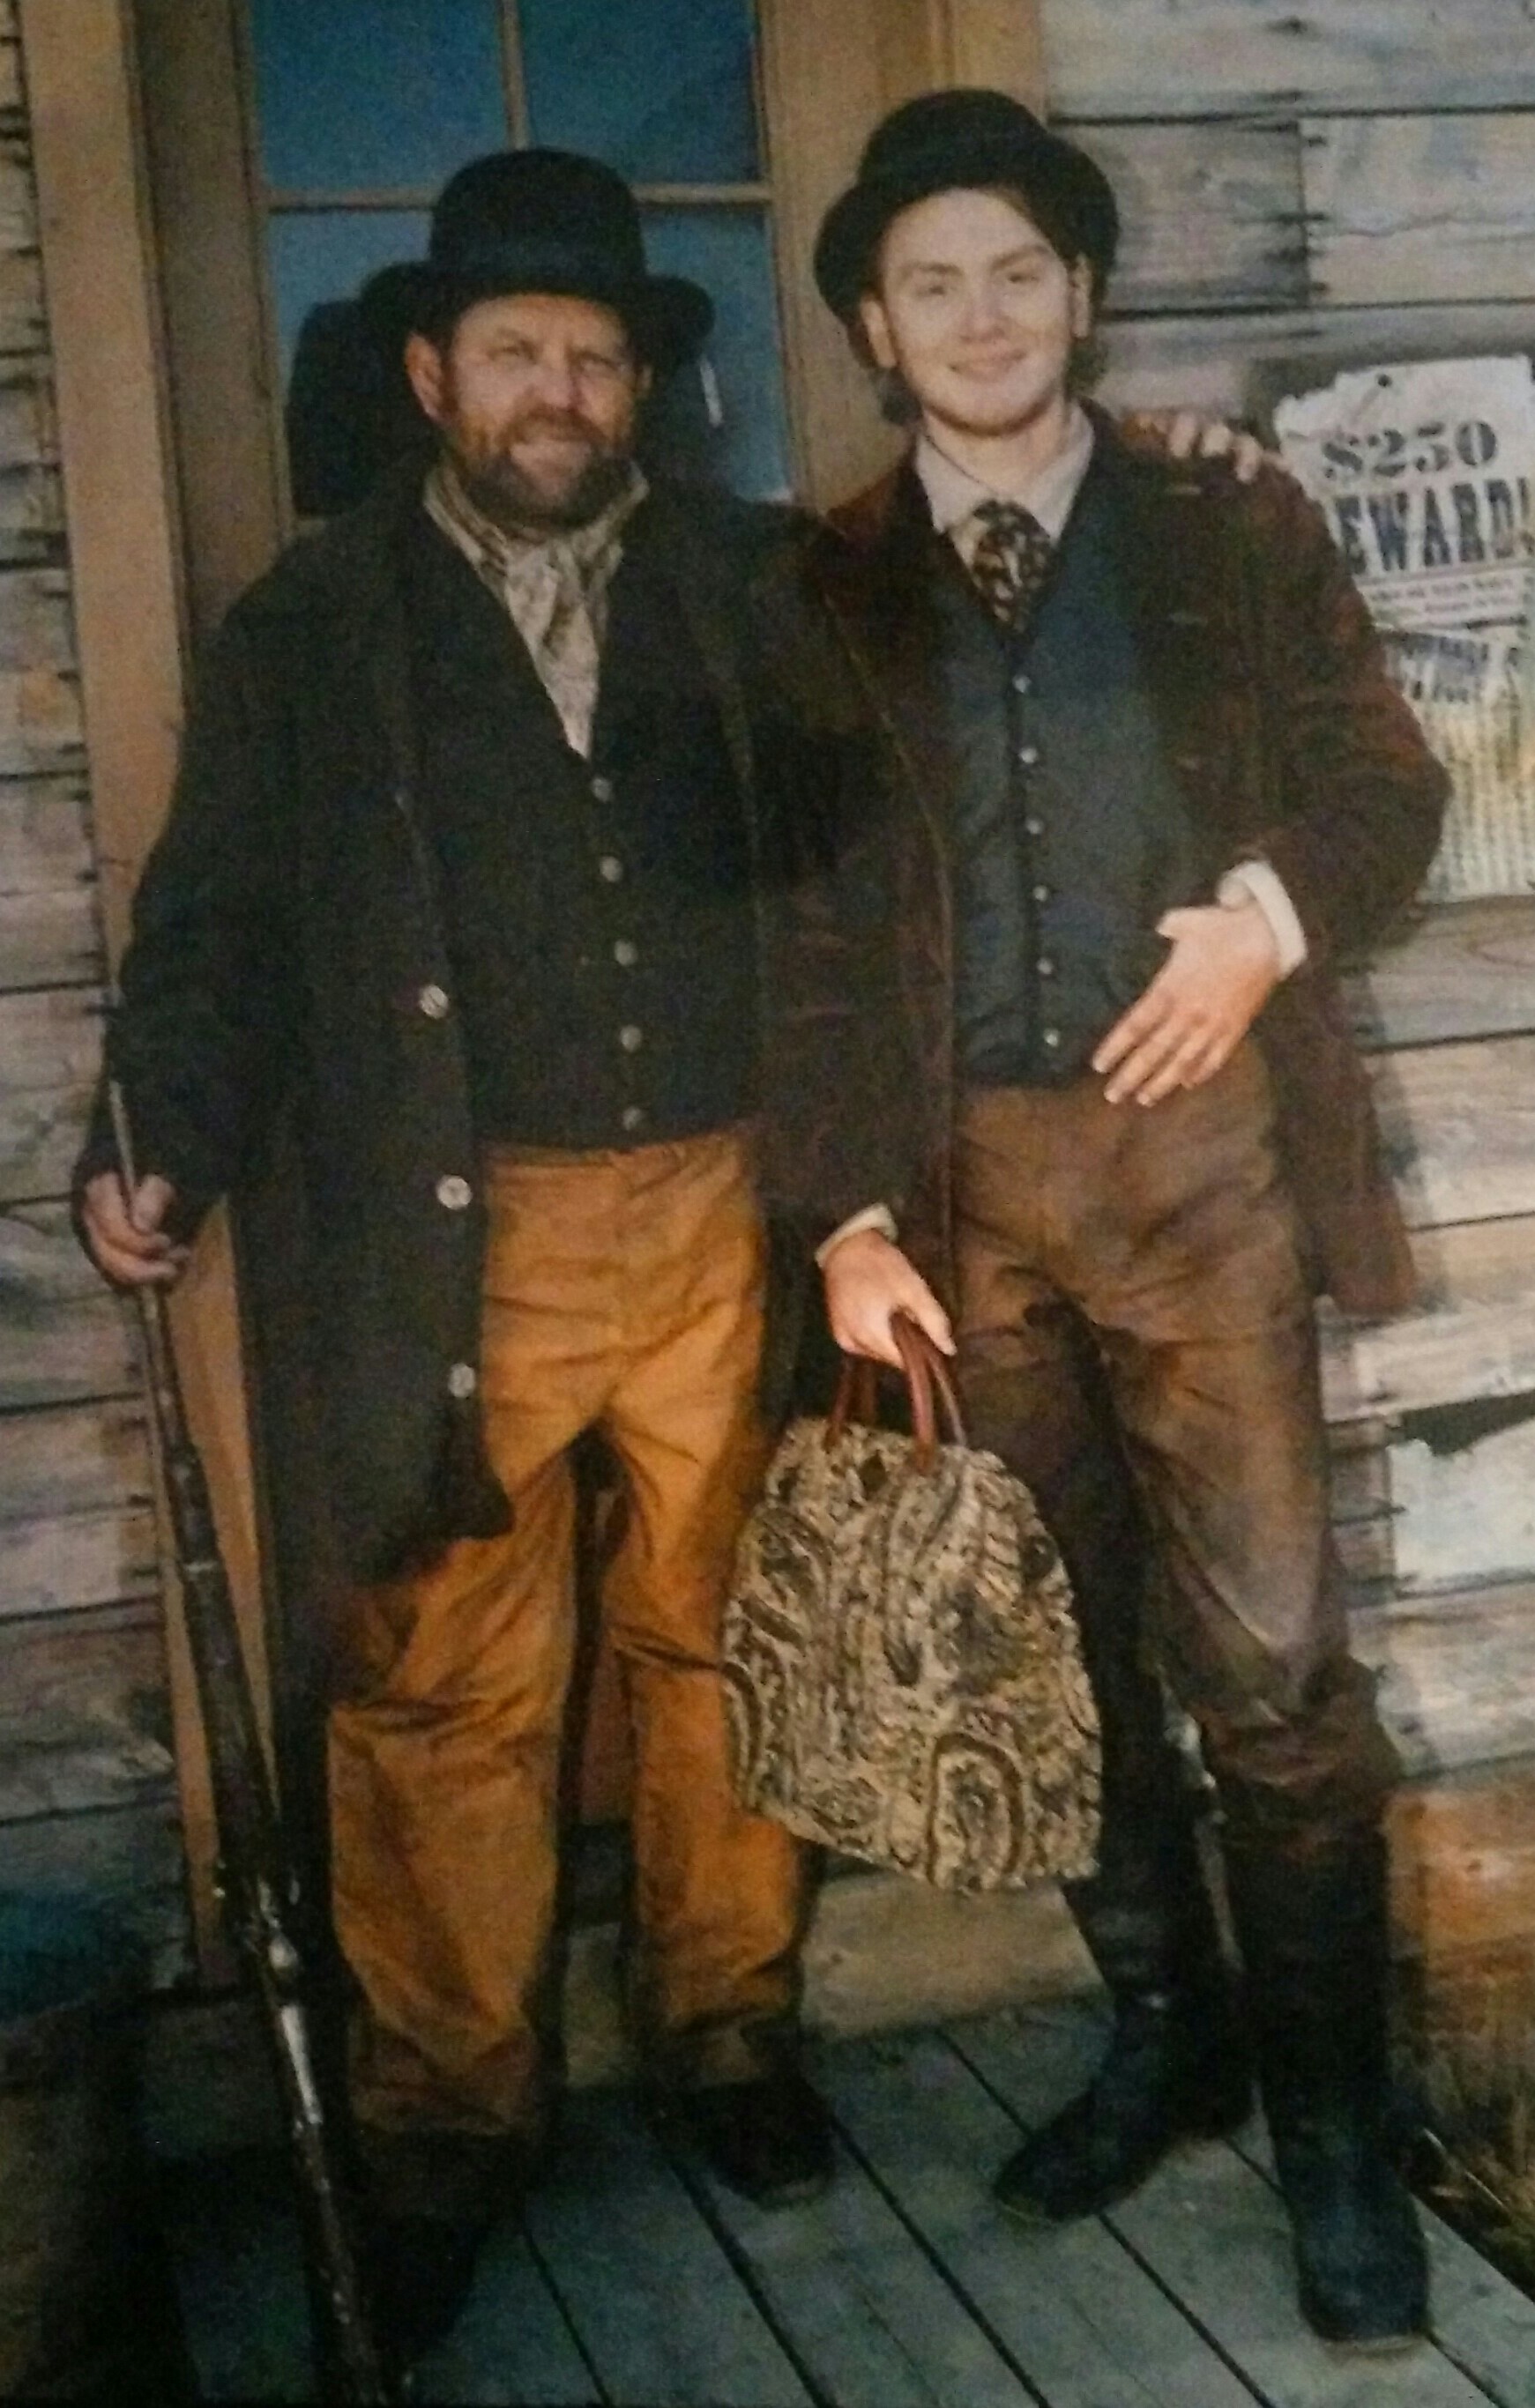 Me and my Son Colten on the set of Hell on Wheels